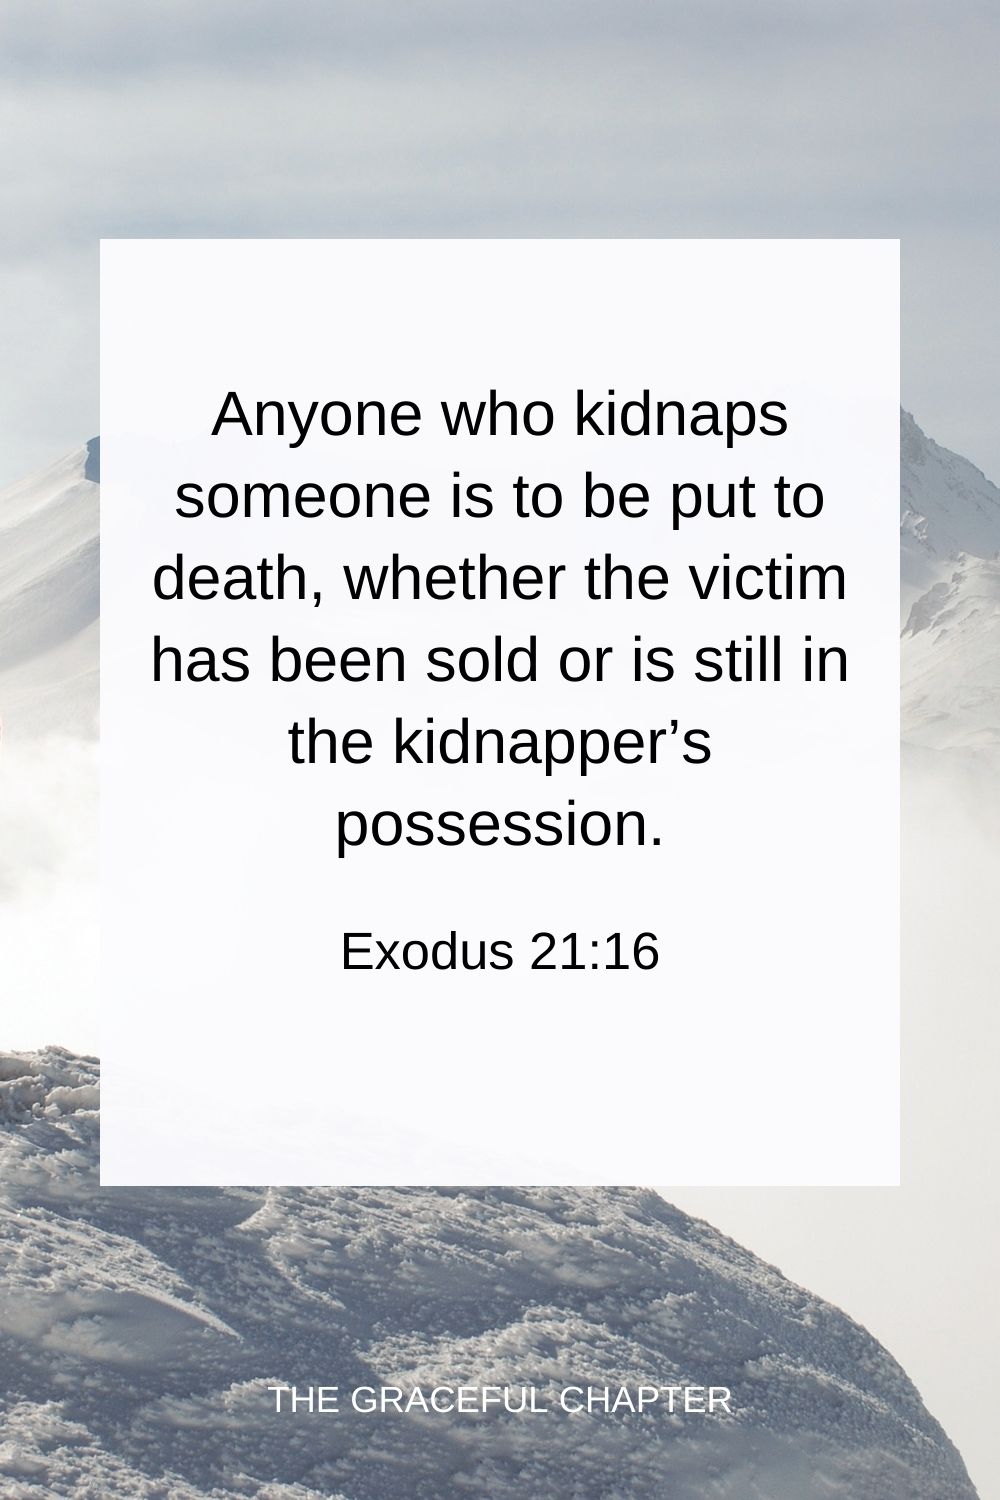 Anyone who kidnaps someone is to be put to death, whether the victim has been sold or is still in the kidnapper’s possession. Exodus 21:16